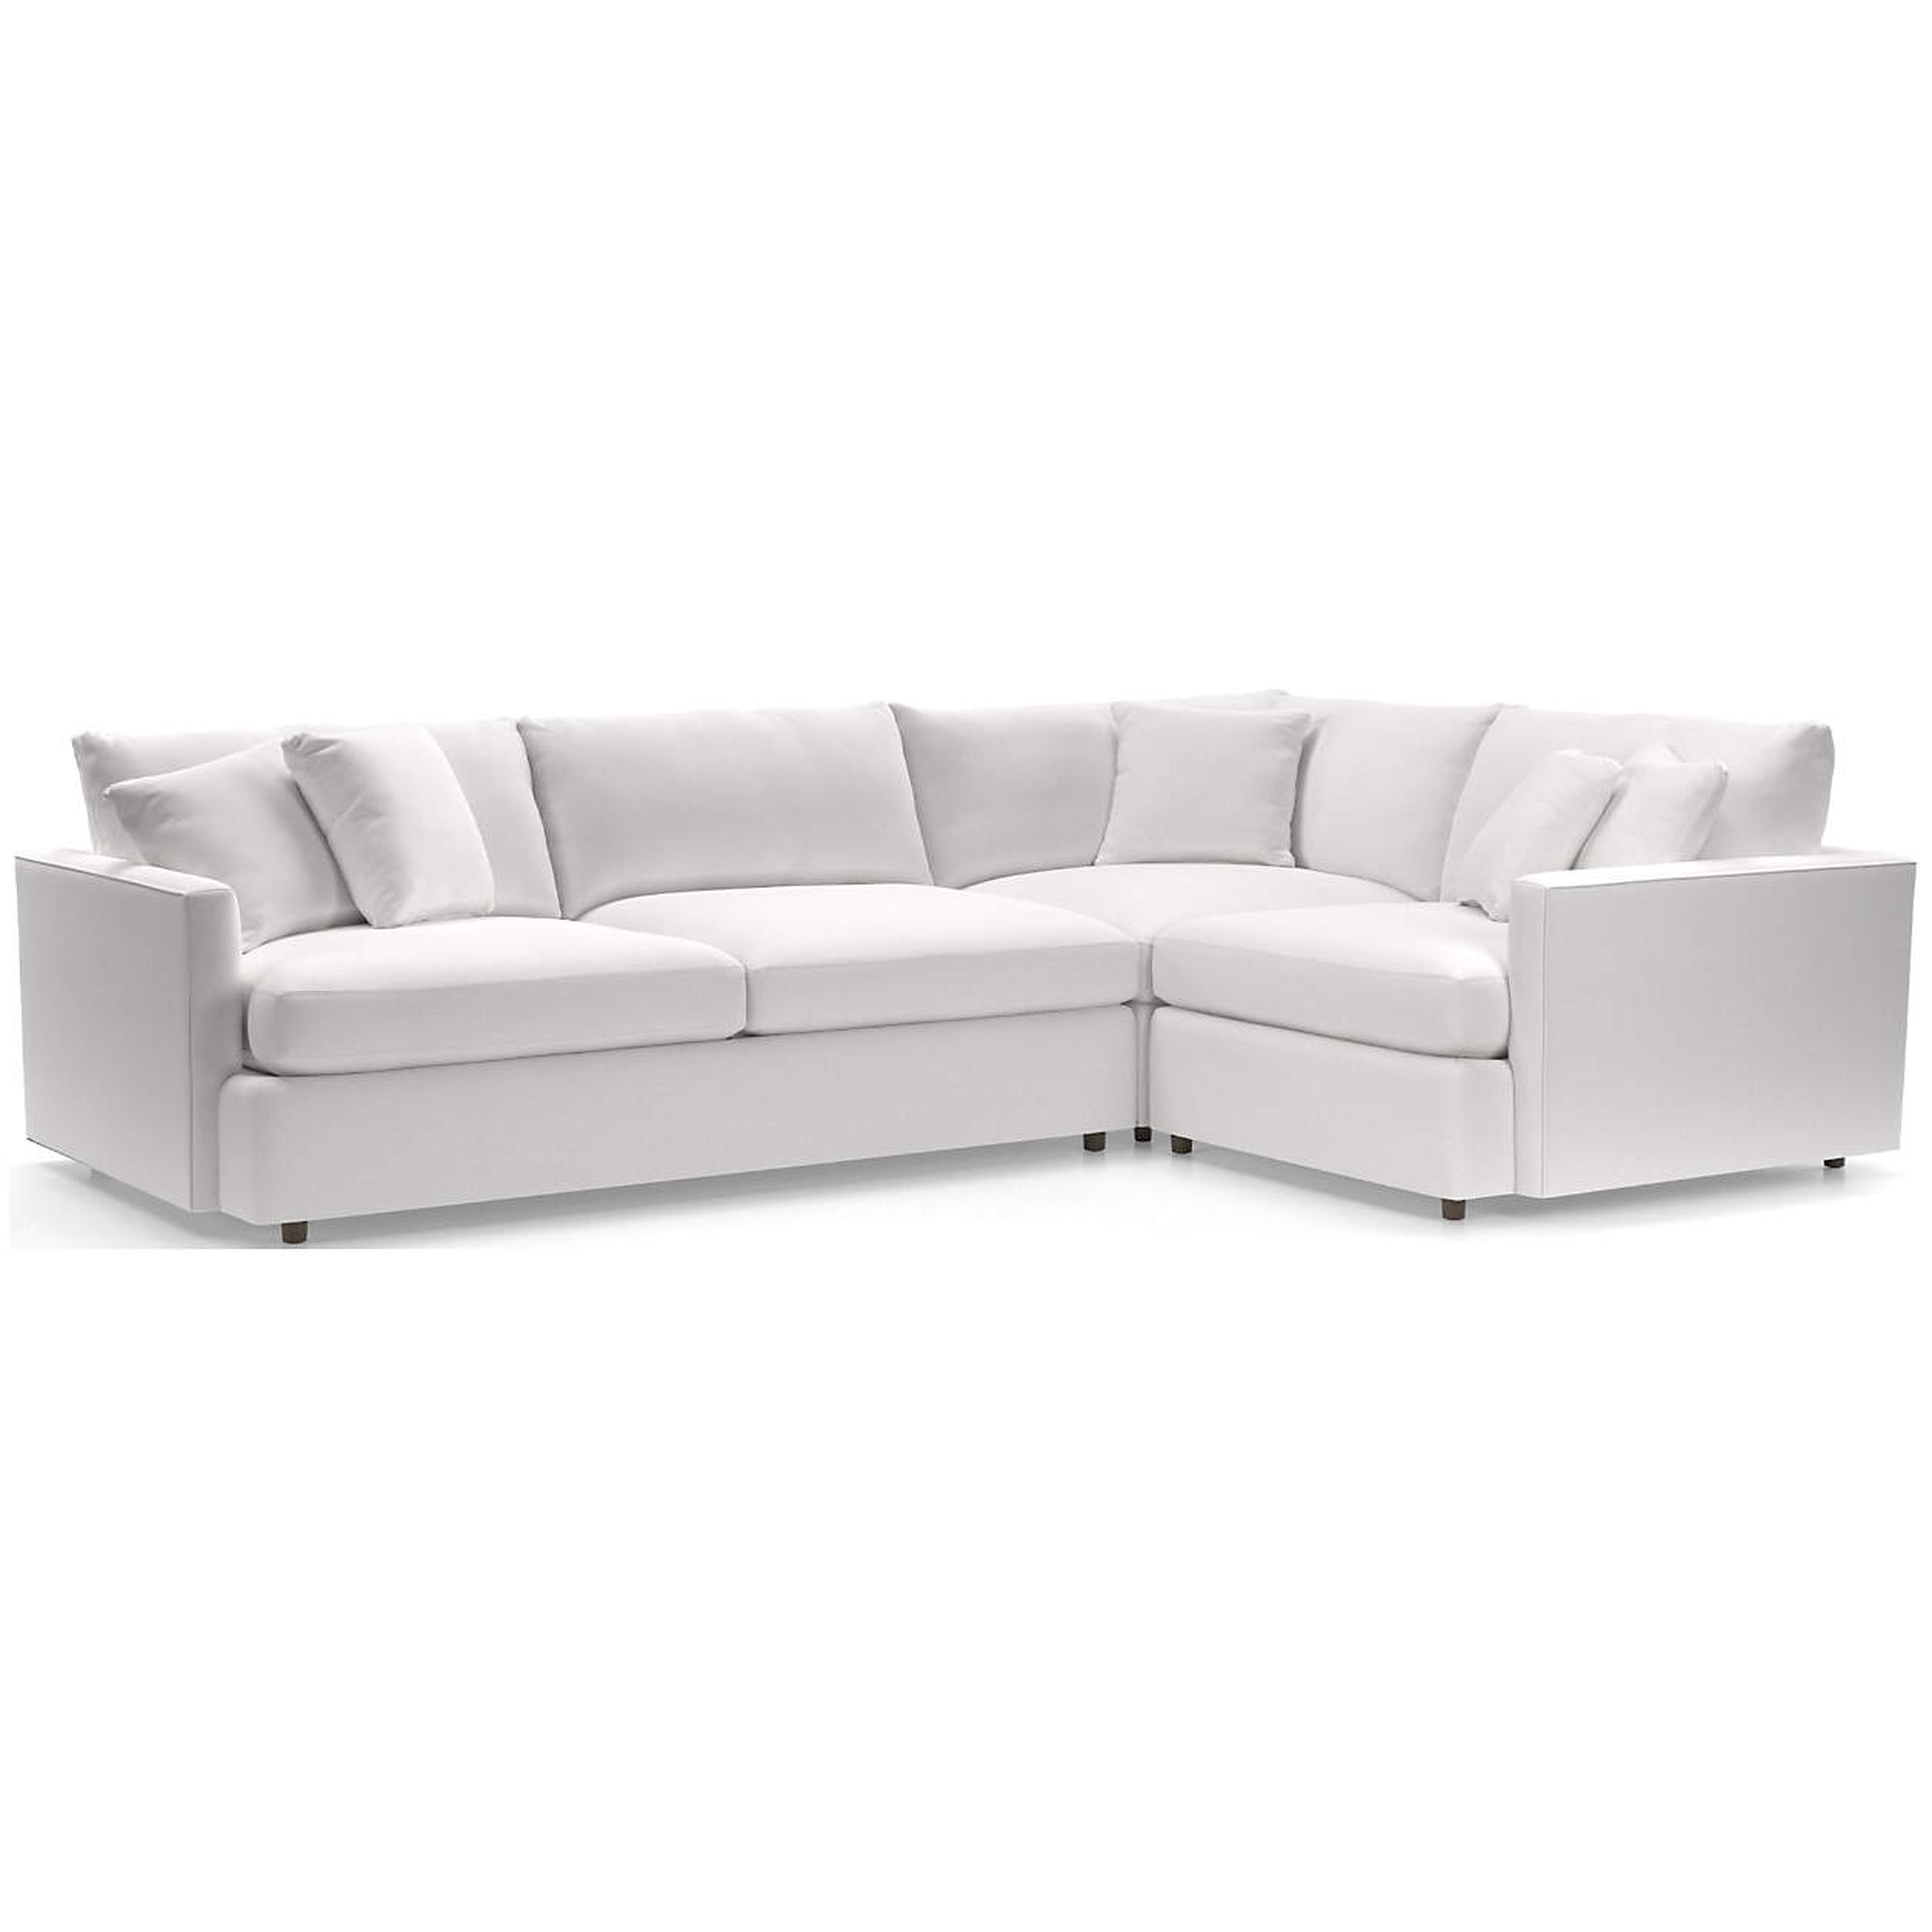 Lounge 3-Piece Sectional-View, White - Crate and Barrel